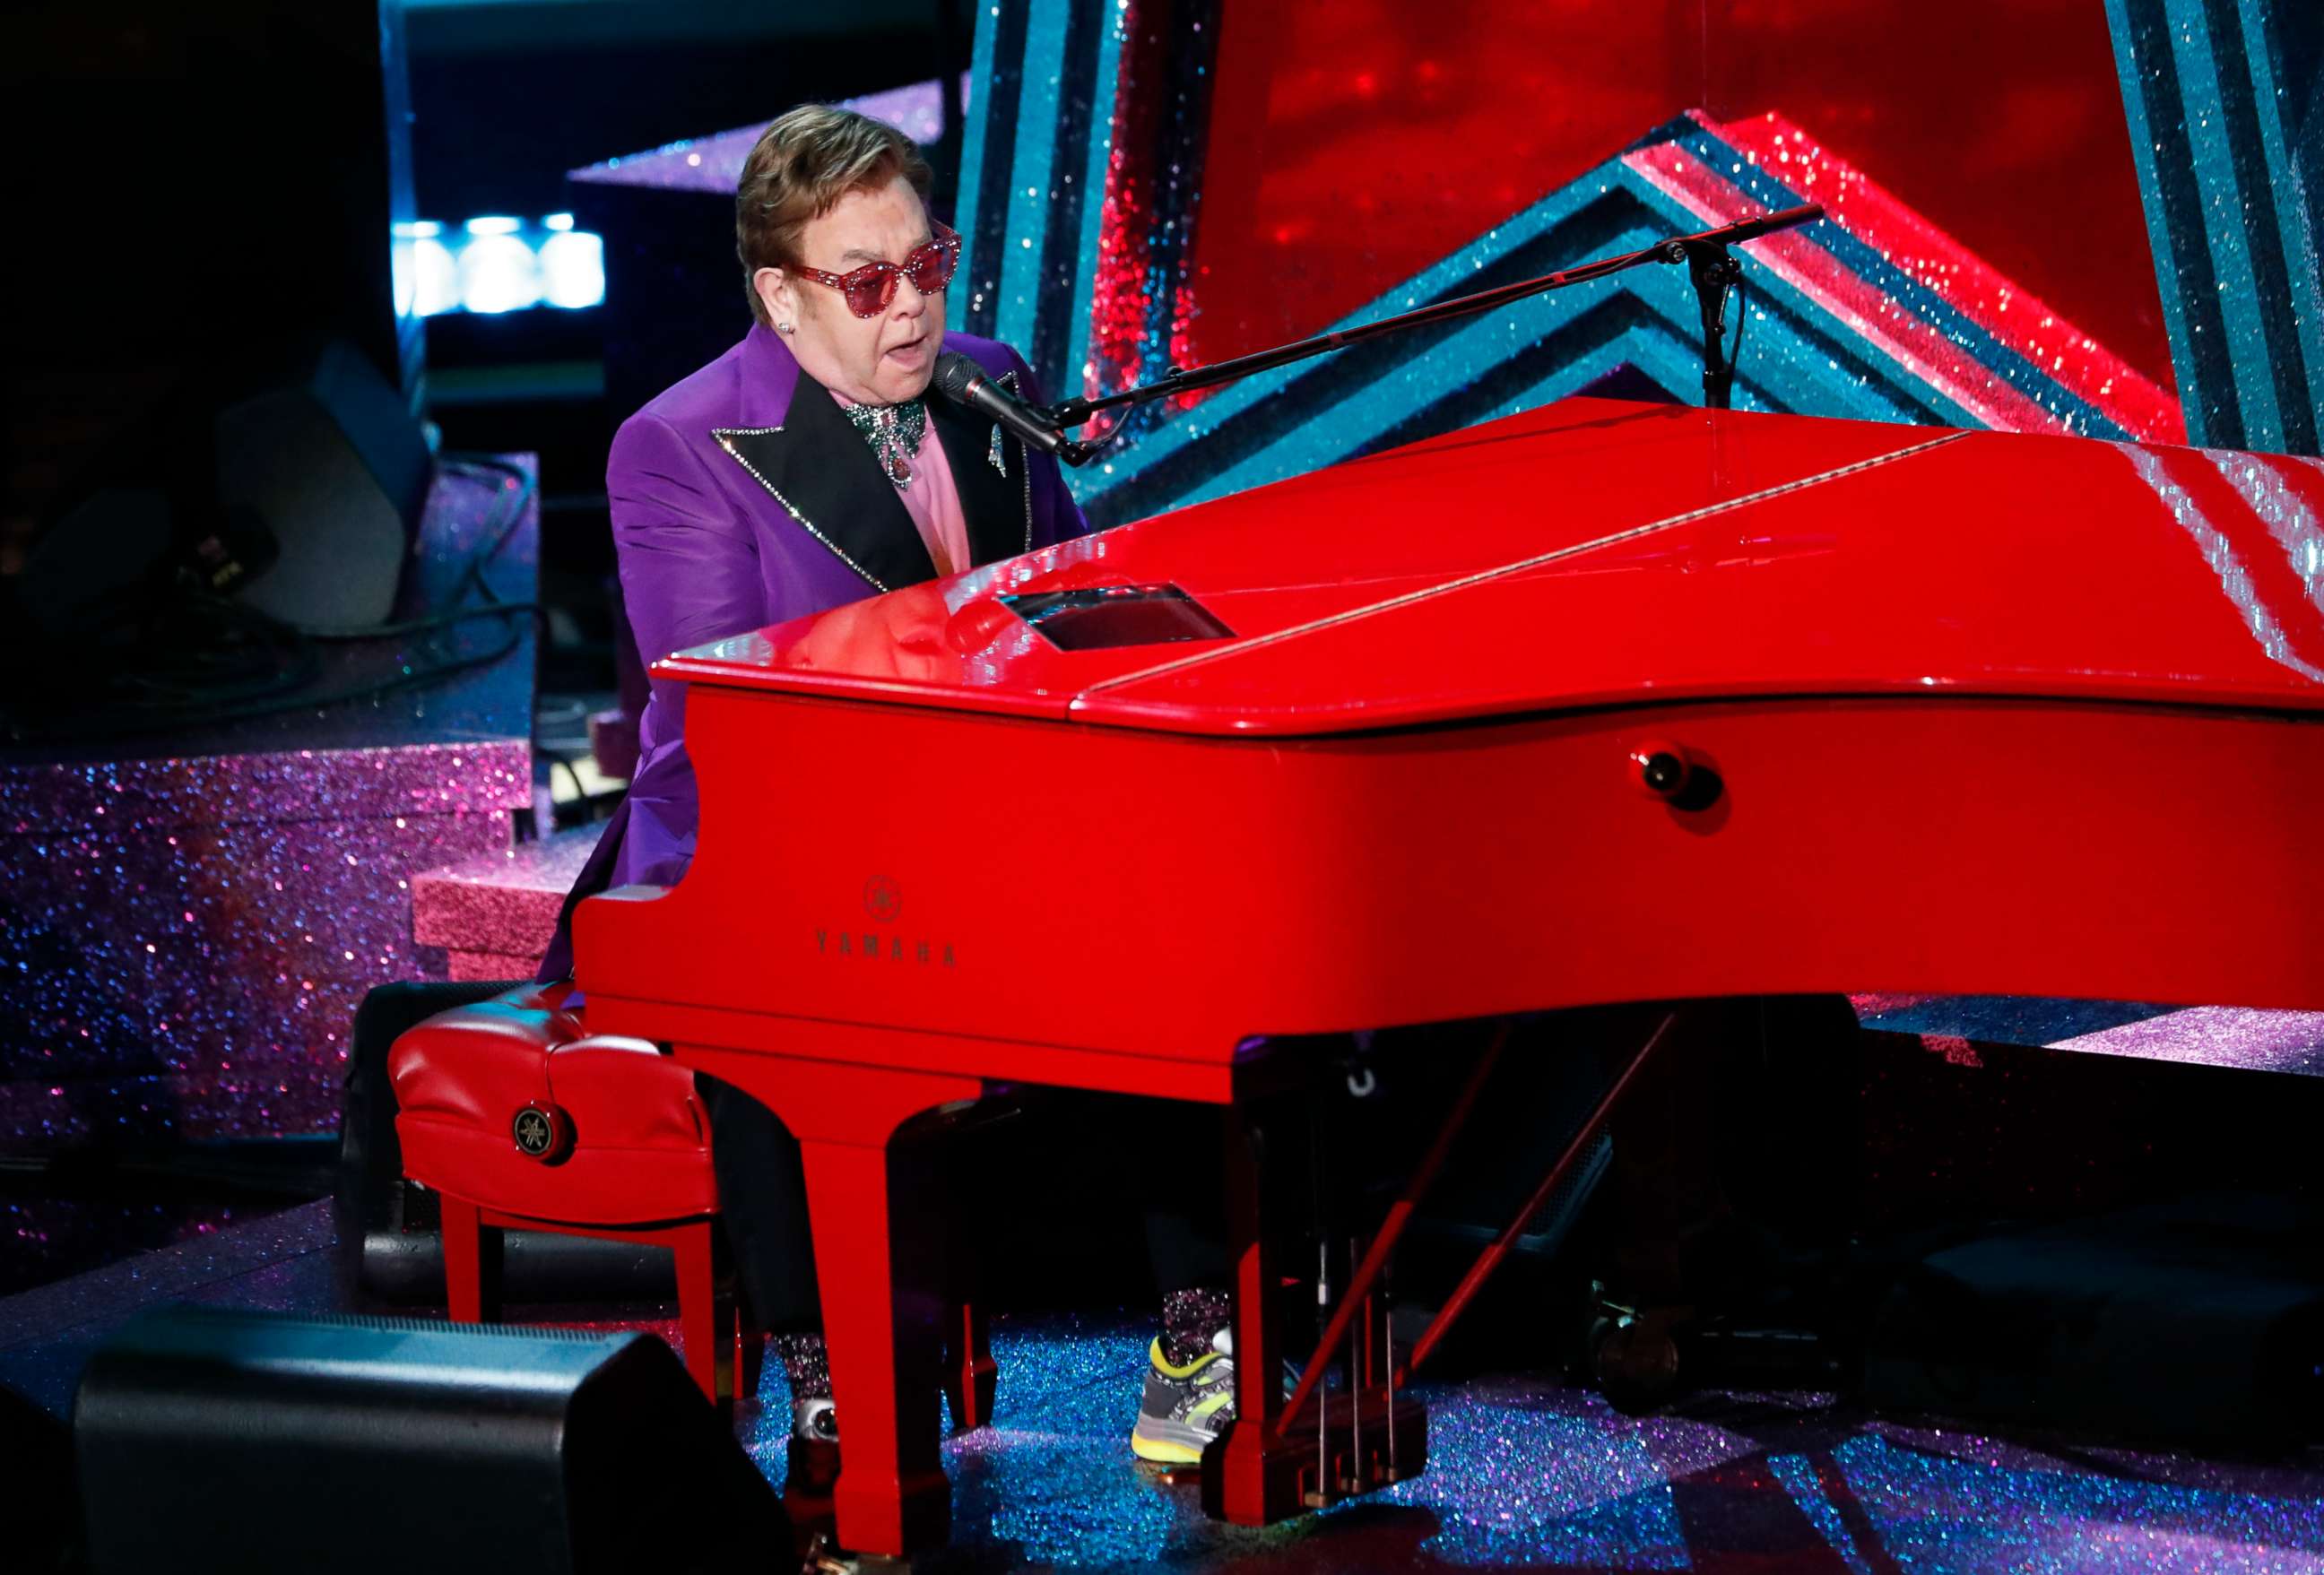 PHOTO: Elton John performs "(I'm Gonna) Love Me Again" from Rocketman during the Oscars show at the 92nd Academy Awards in Hollywood, Calif., Feb. 9, 2020.